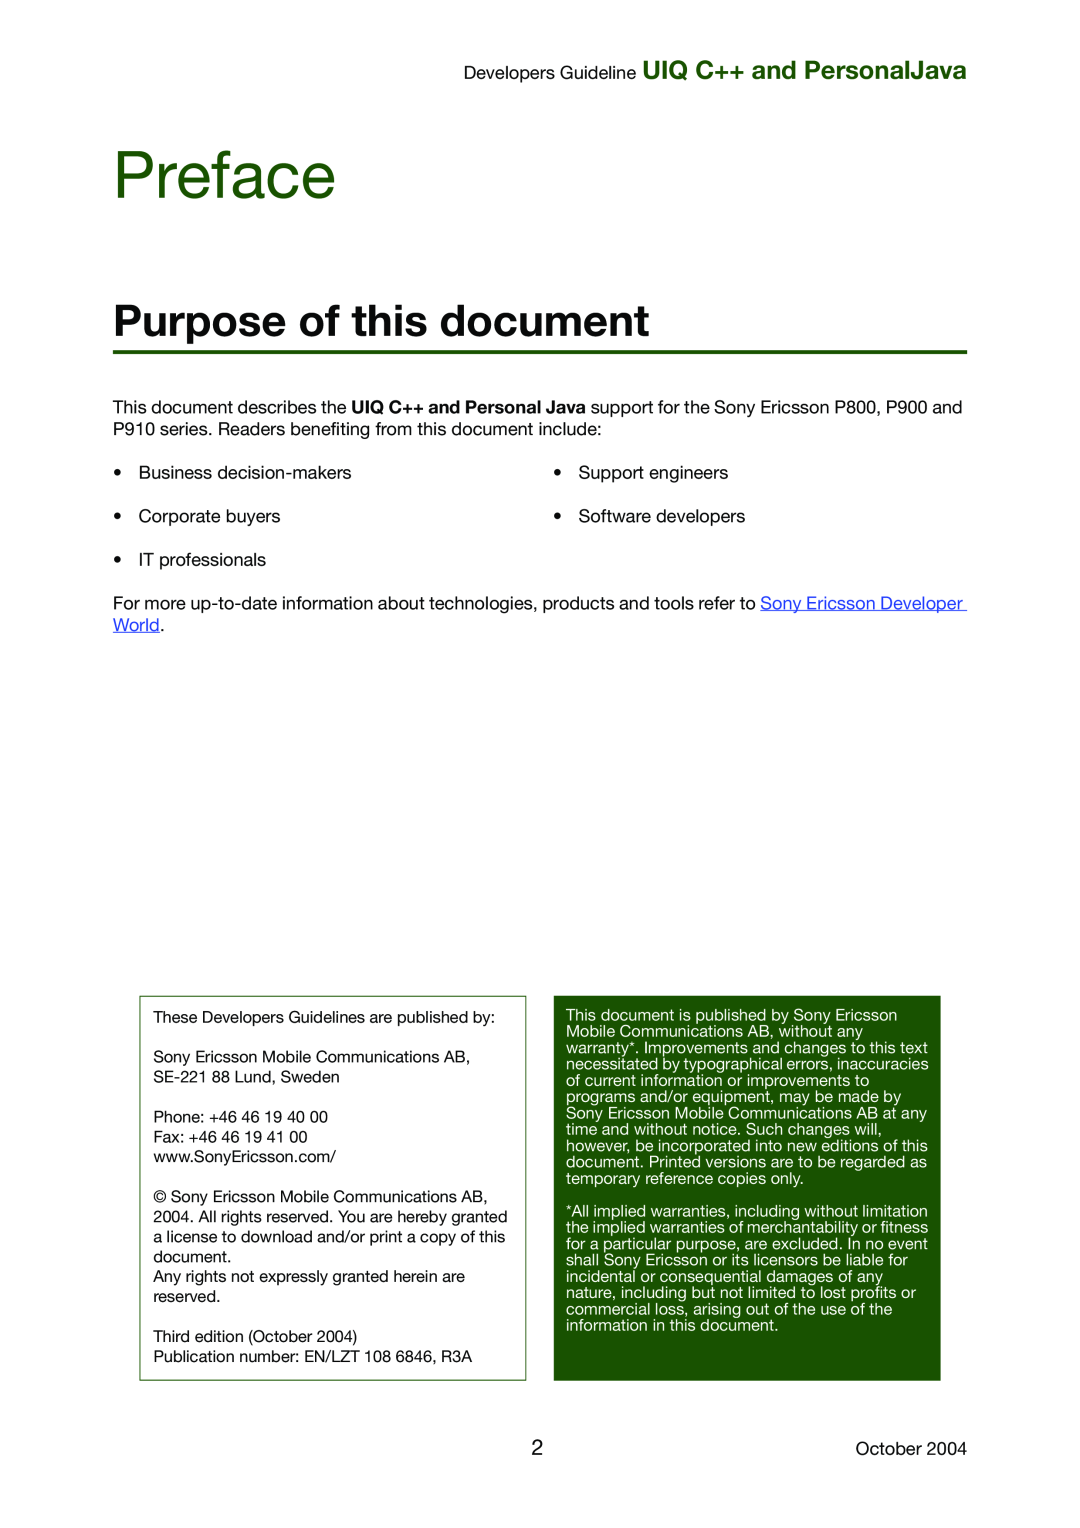 Sony Ericsson P900, P800 manual Preface, Purpose of this document, Developers Guideline UIQ C++ and PersonalJava 